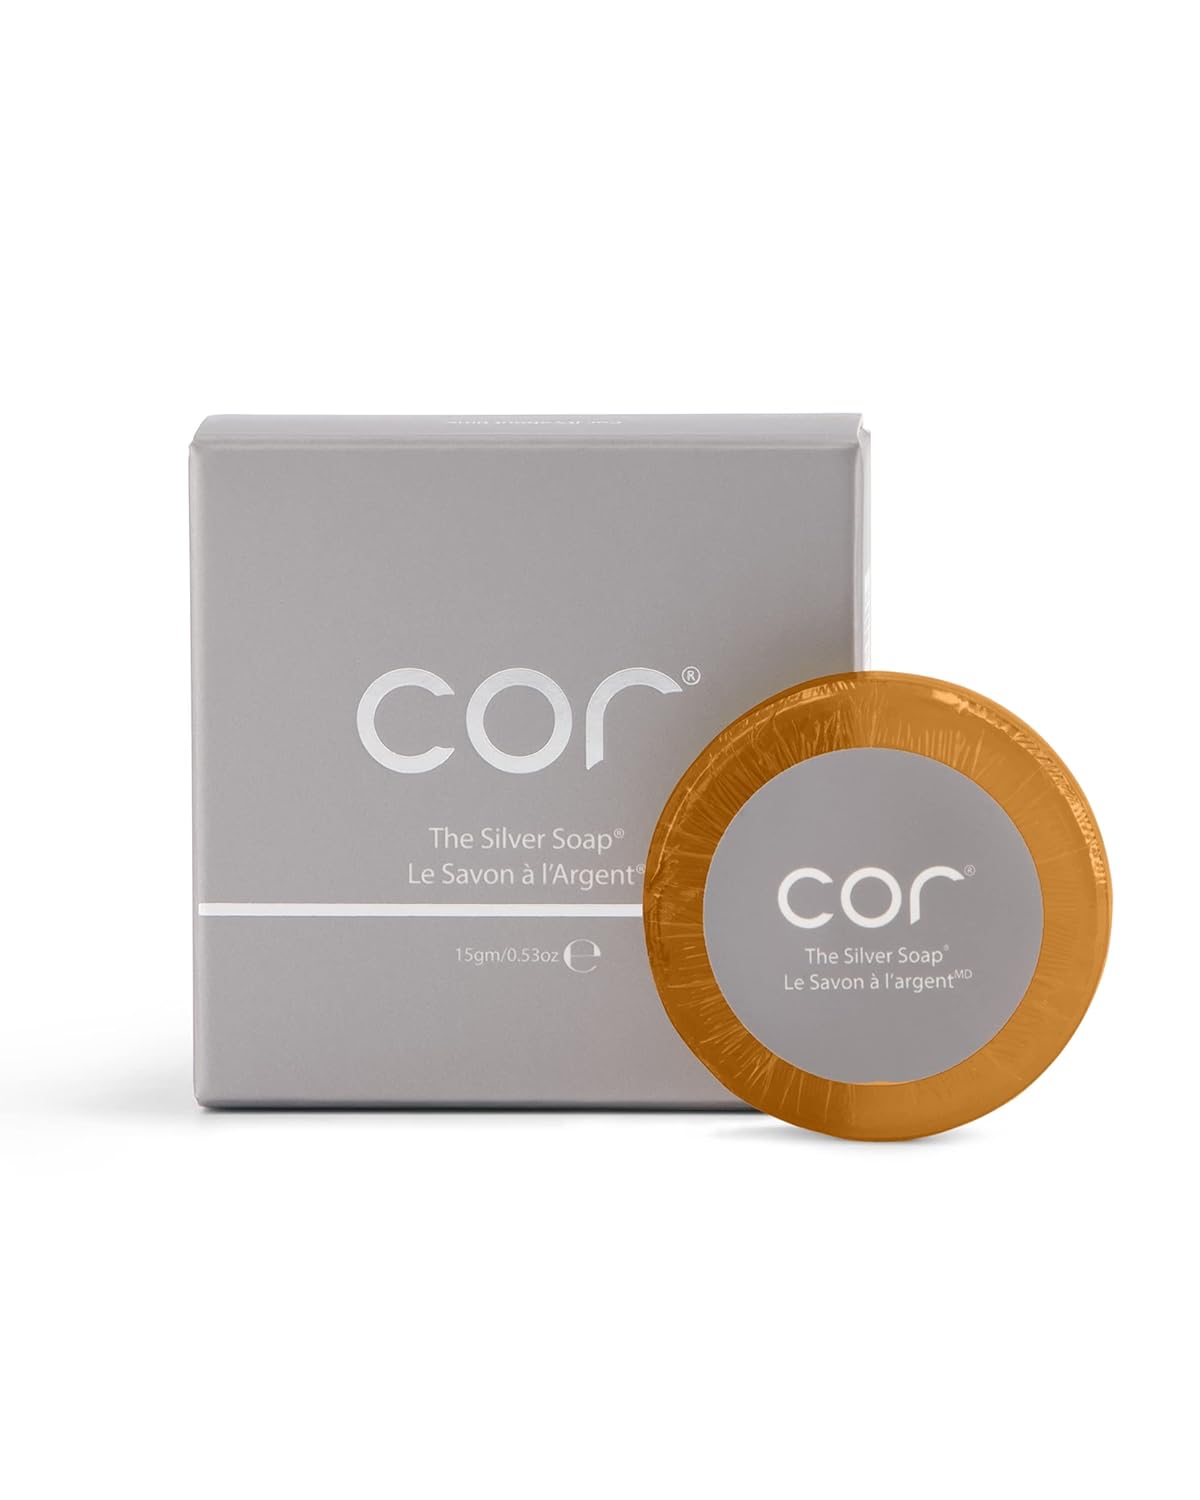 Cor Silver Soap | Multi-tasking hydrating + cleansing bar for sensitive + acne-prone skin | Luxury foam soothes + nourishes while providing deep cleaning | 3 handy sizes (15 gm Silver Soap)